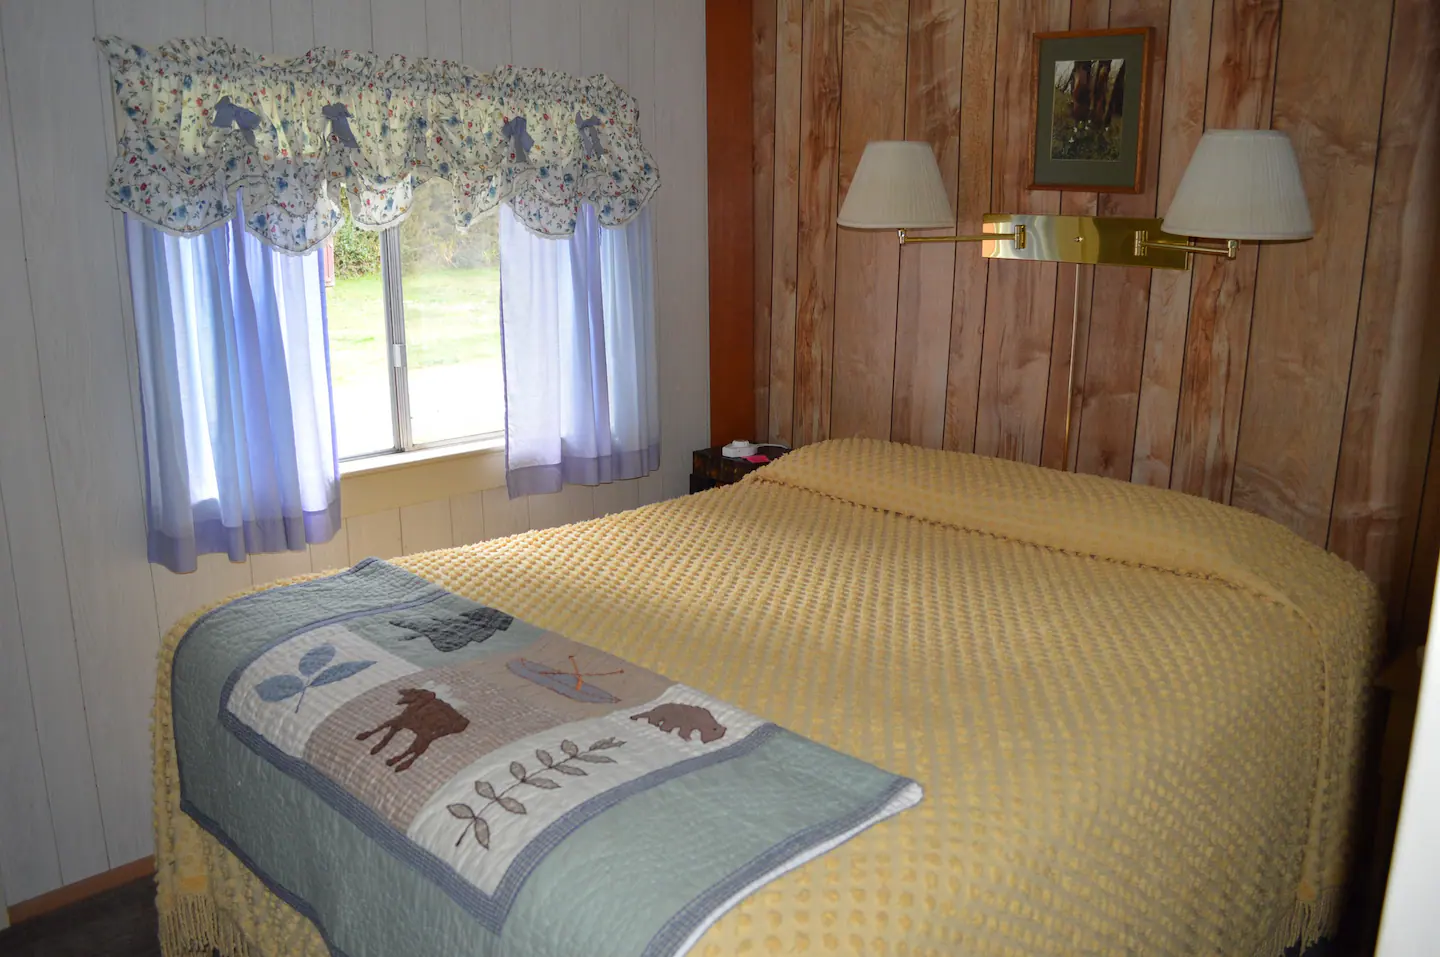 The north bedroom includes a queen bed, heated mattress pad, small chest of drawers, and a tiny closet.